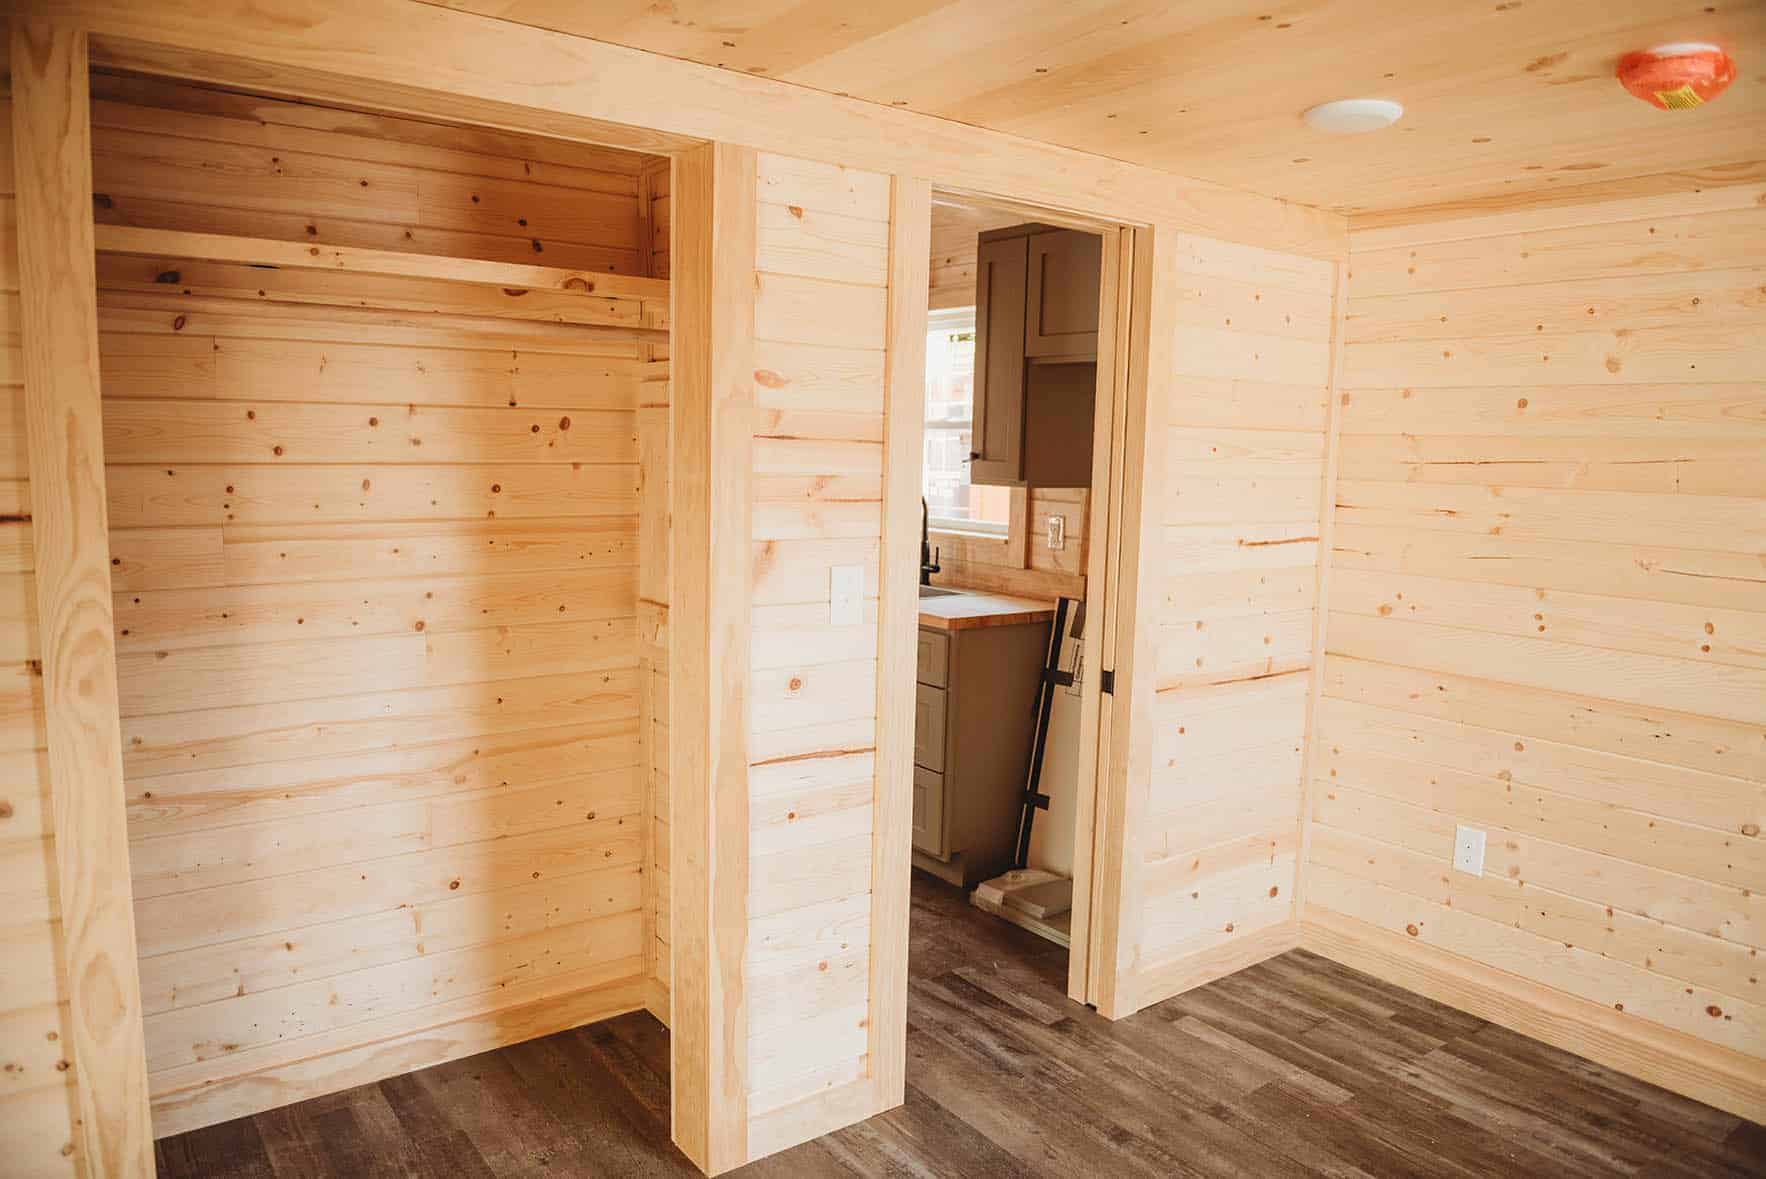 Prefab Tiny Home Log Cabin Bedroom with Rustic Decor